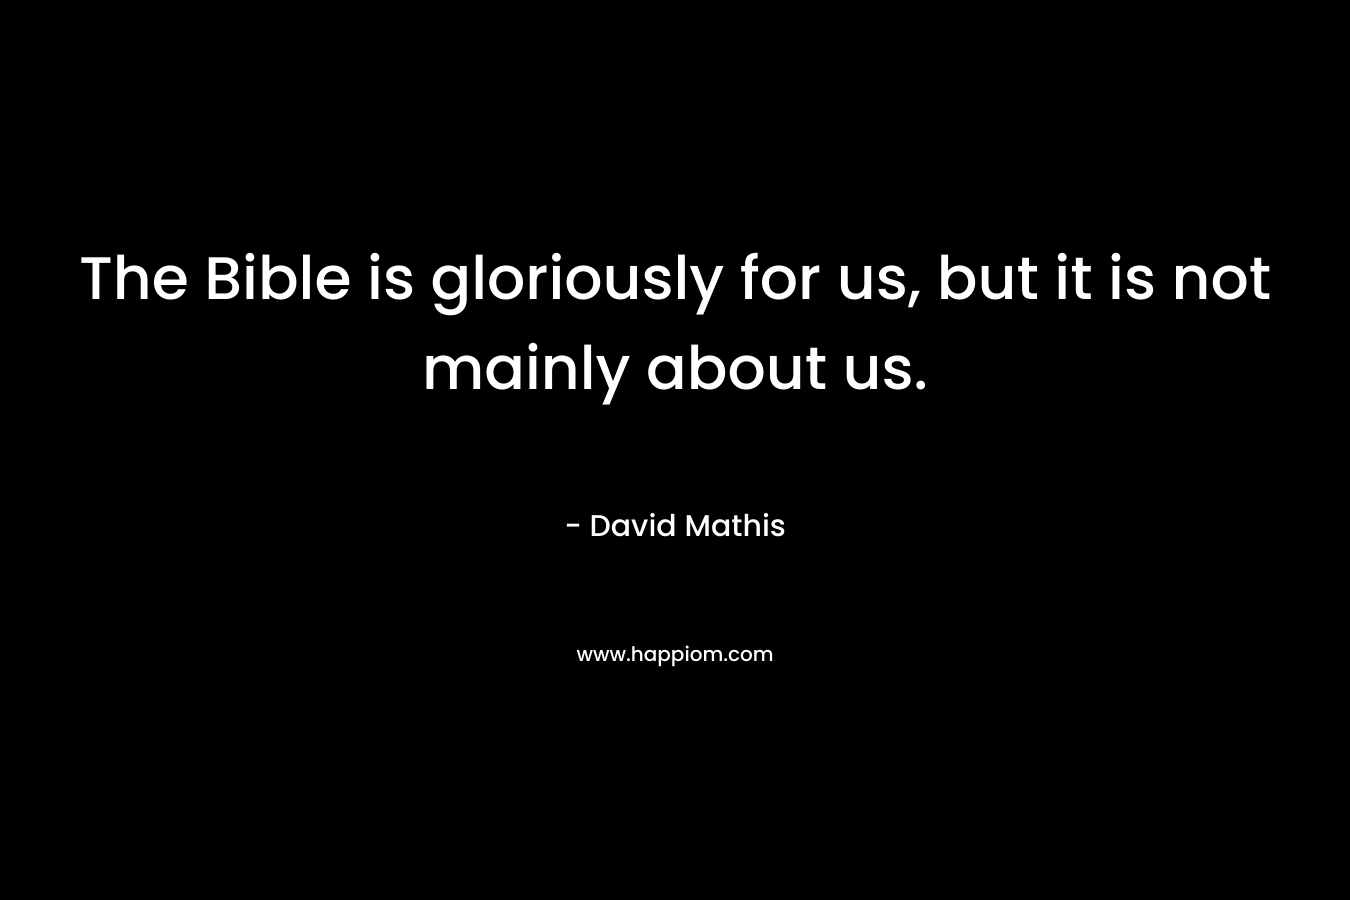 The Bible is gloriously for us, but it is not mainly about us.